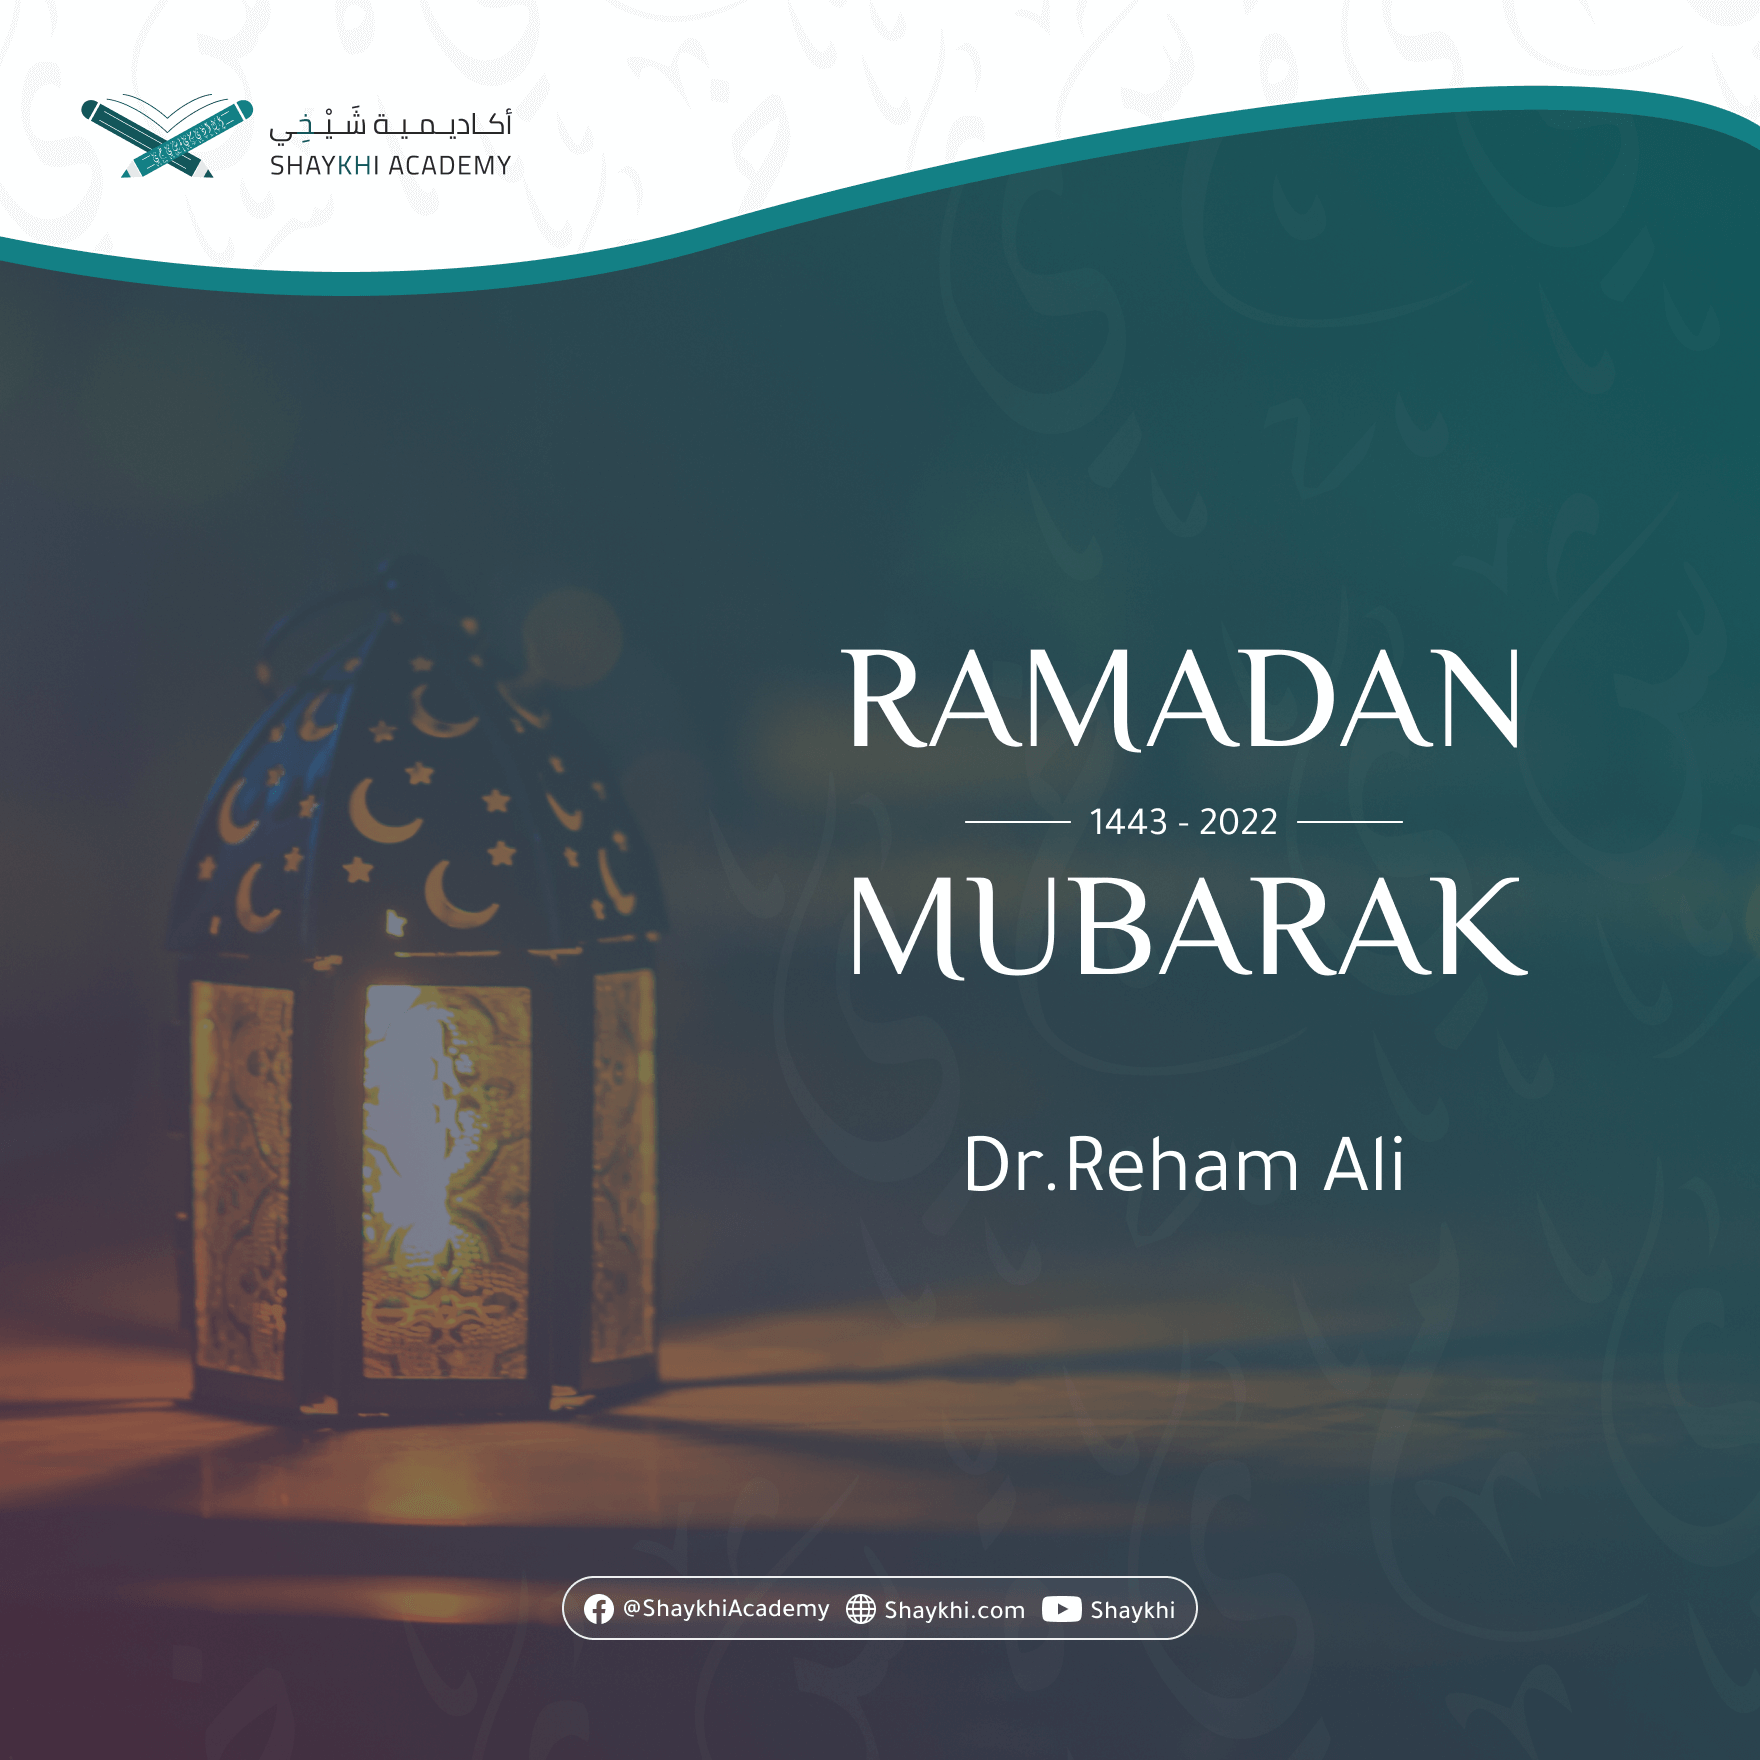 Ramadan Mubarak Images and Meaning - cards for Quran Students 4 Adults